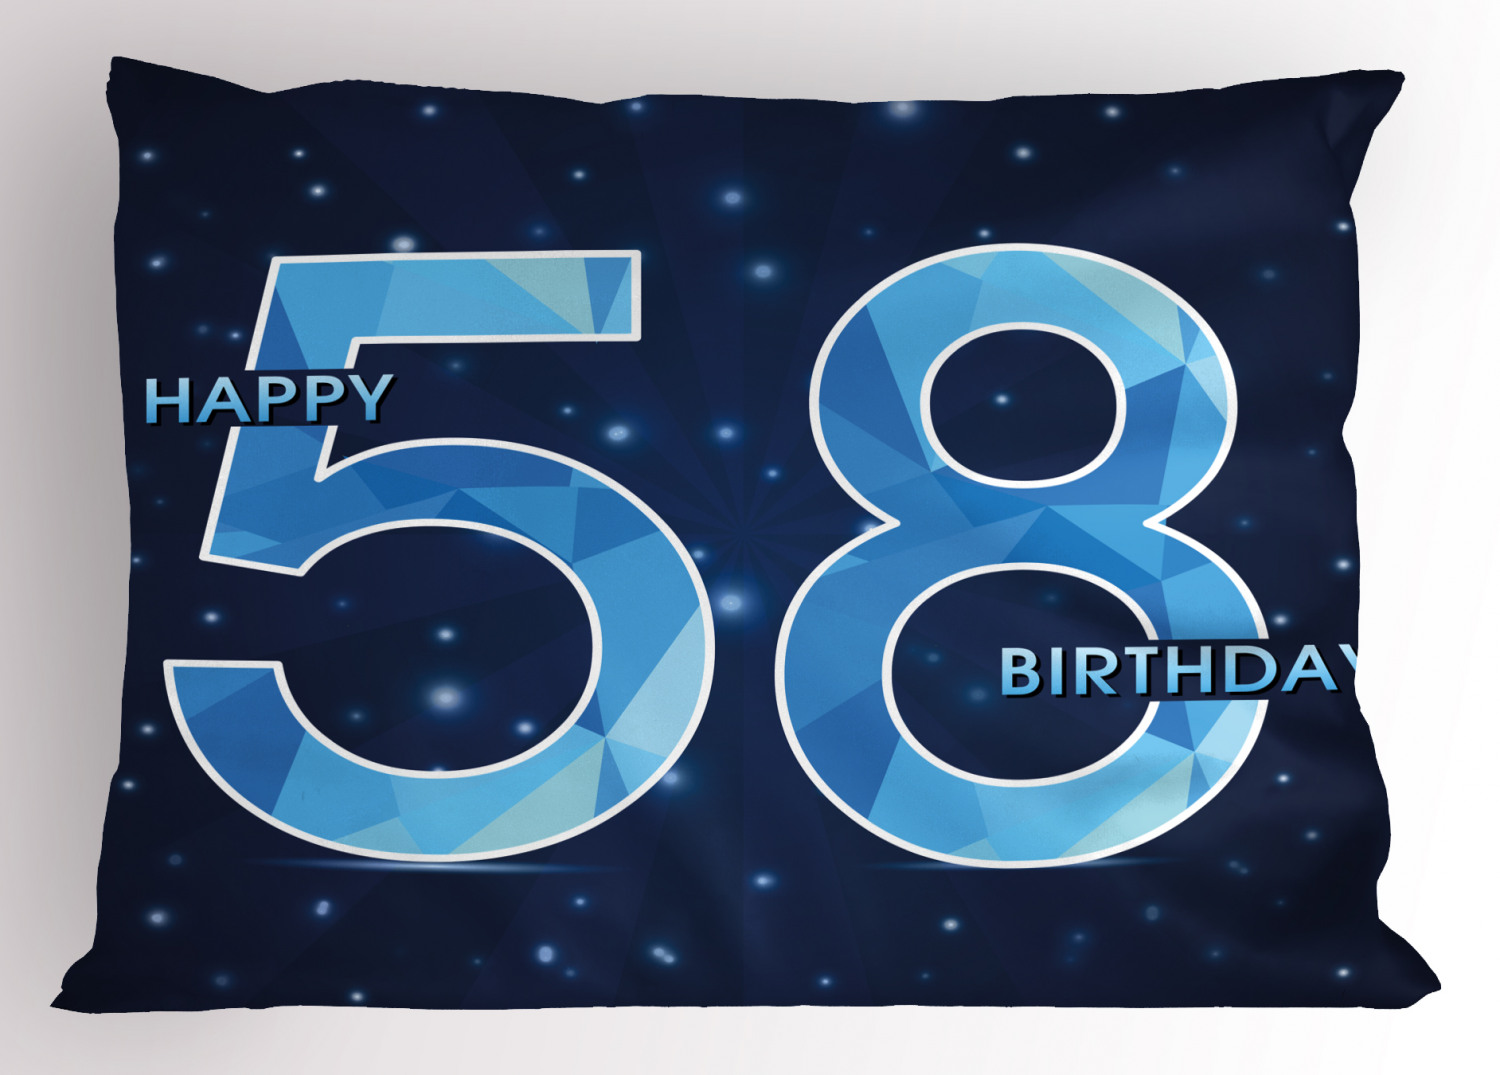 Details about   75th Birthday Pillow Sham Decorative Pillowcase 3 Sizes Bedroom Decor 